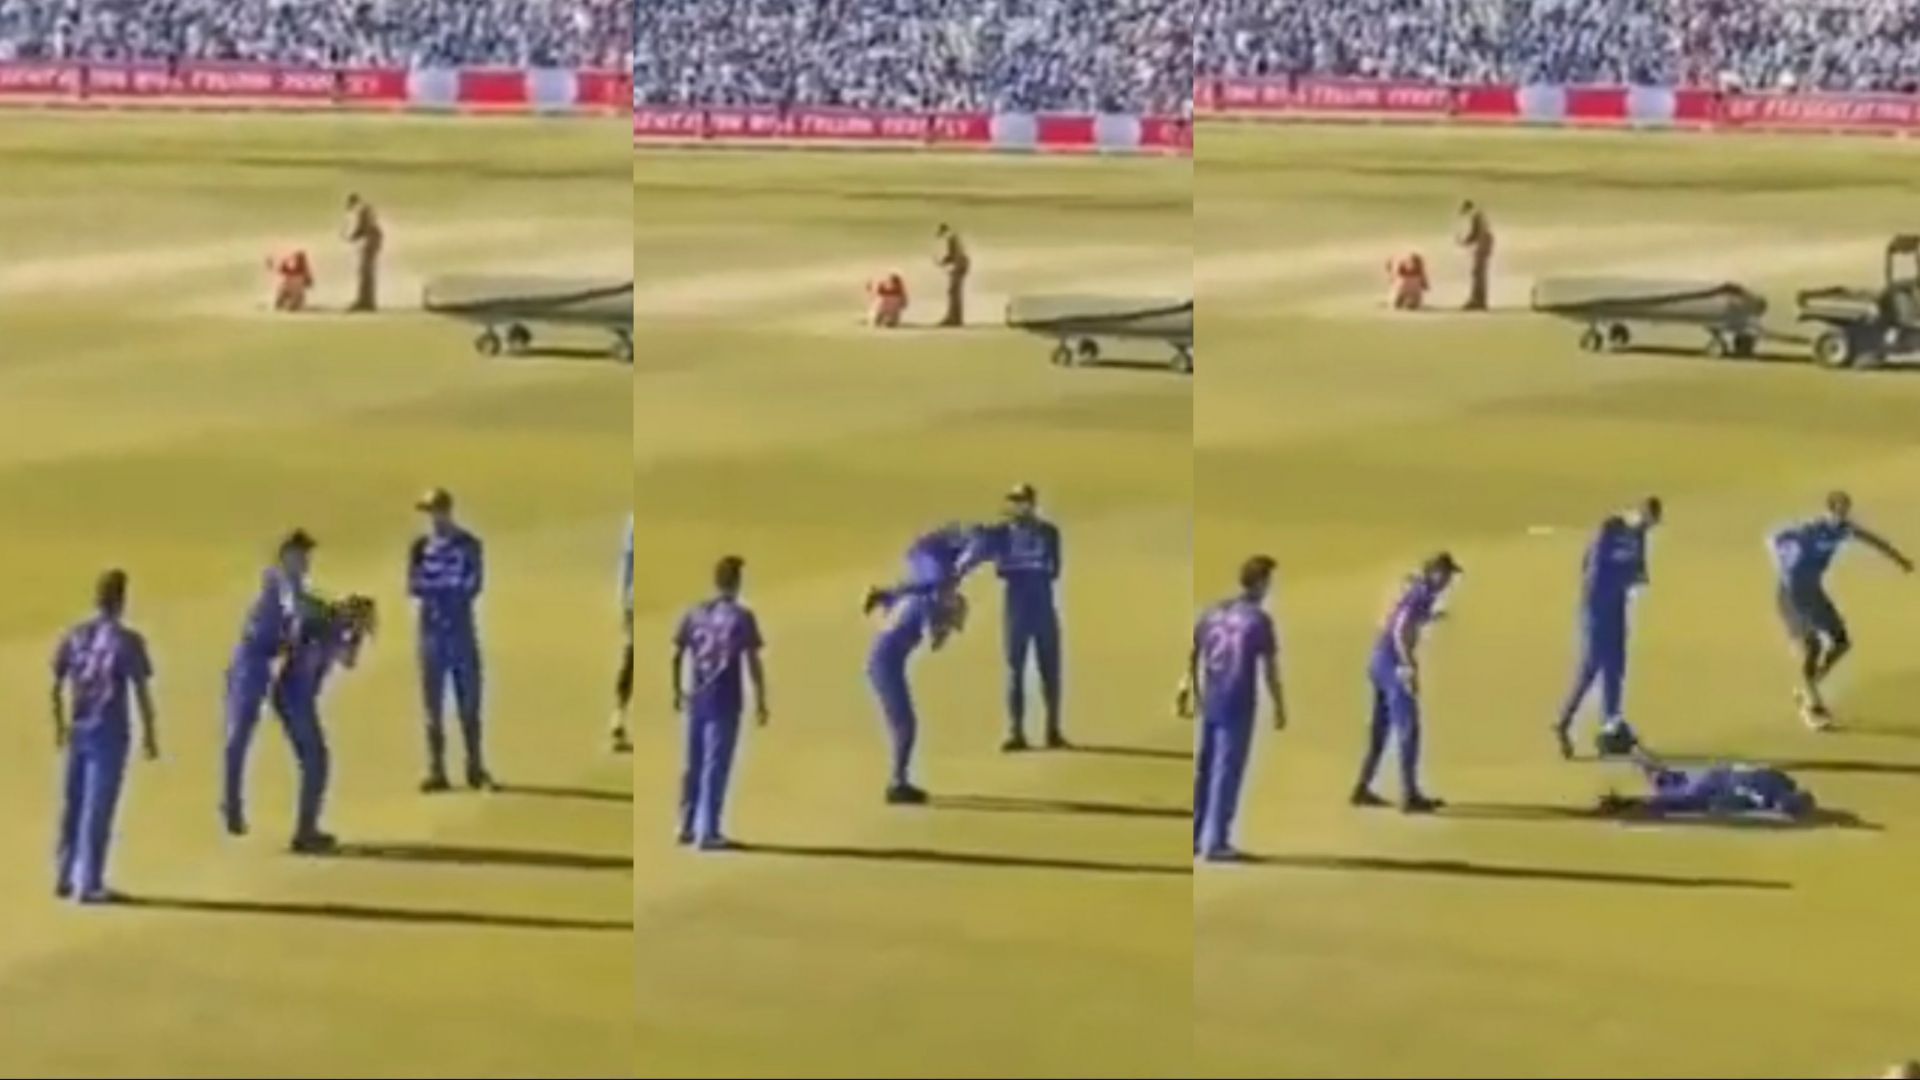 Ishan Kishan had some fun with his teammates during a break in the match (Image: Twitter)